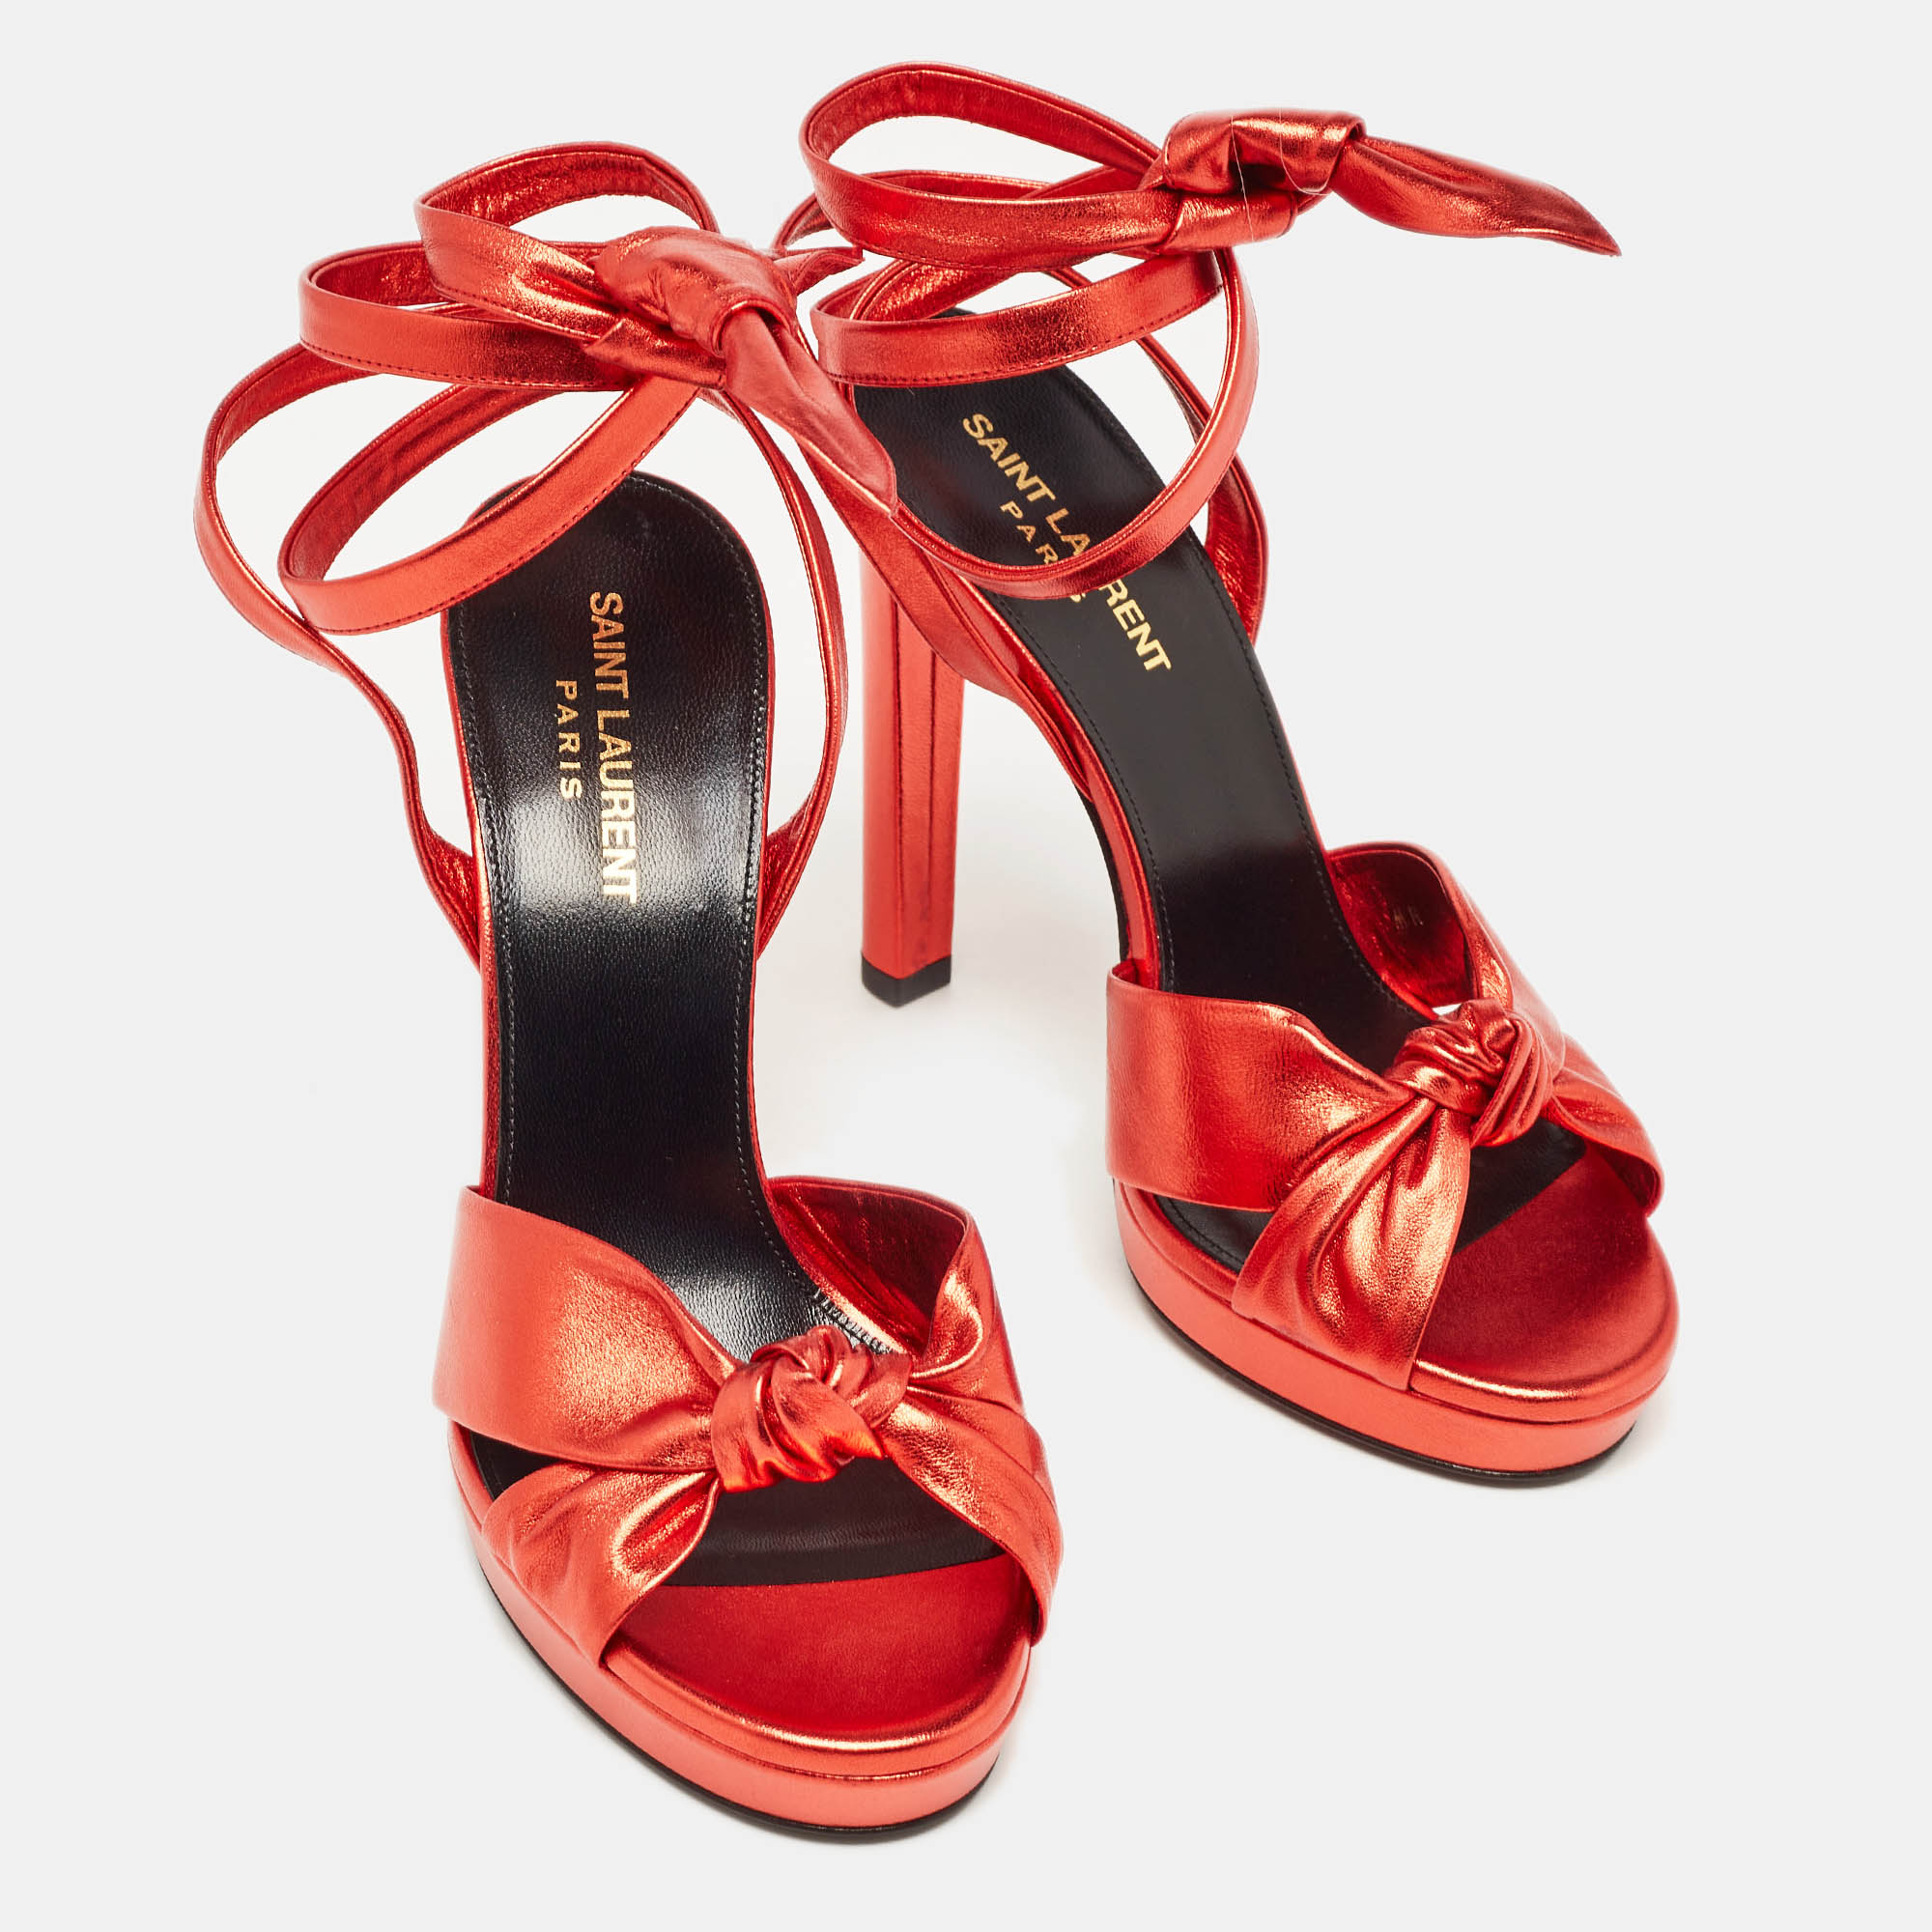 Yves Saint Laurent Red Leather Knotted Ankle Wrap Sandals Size 38